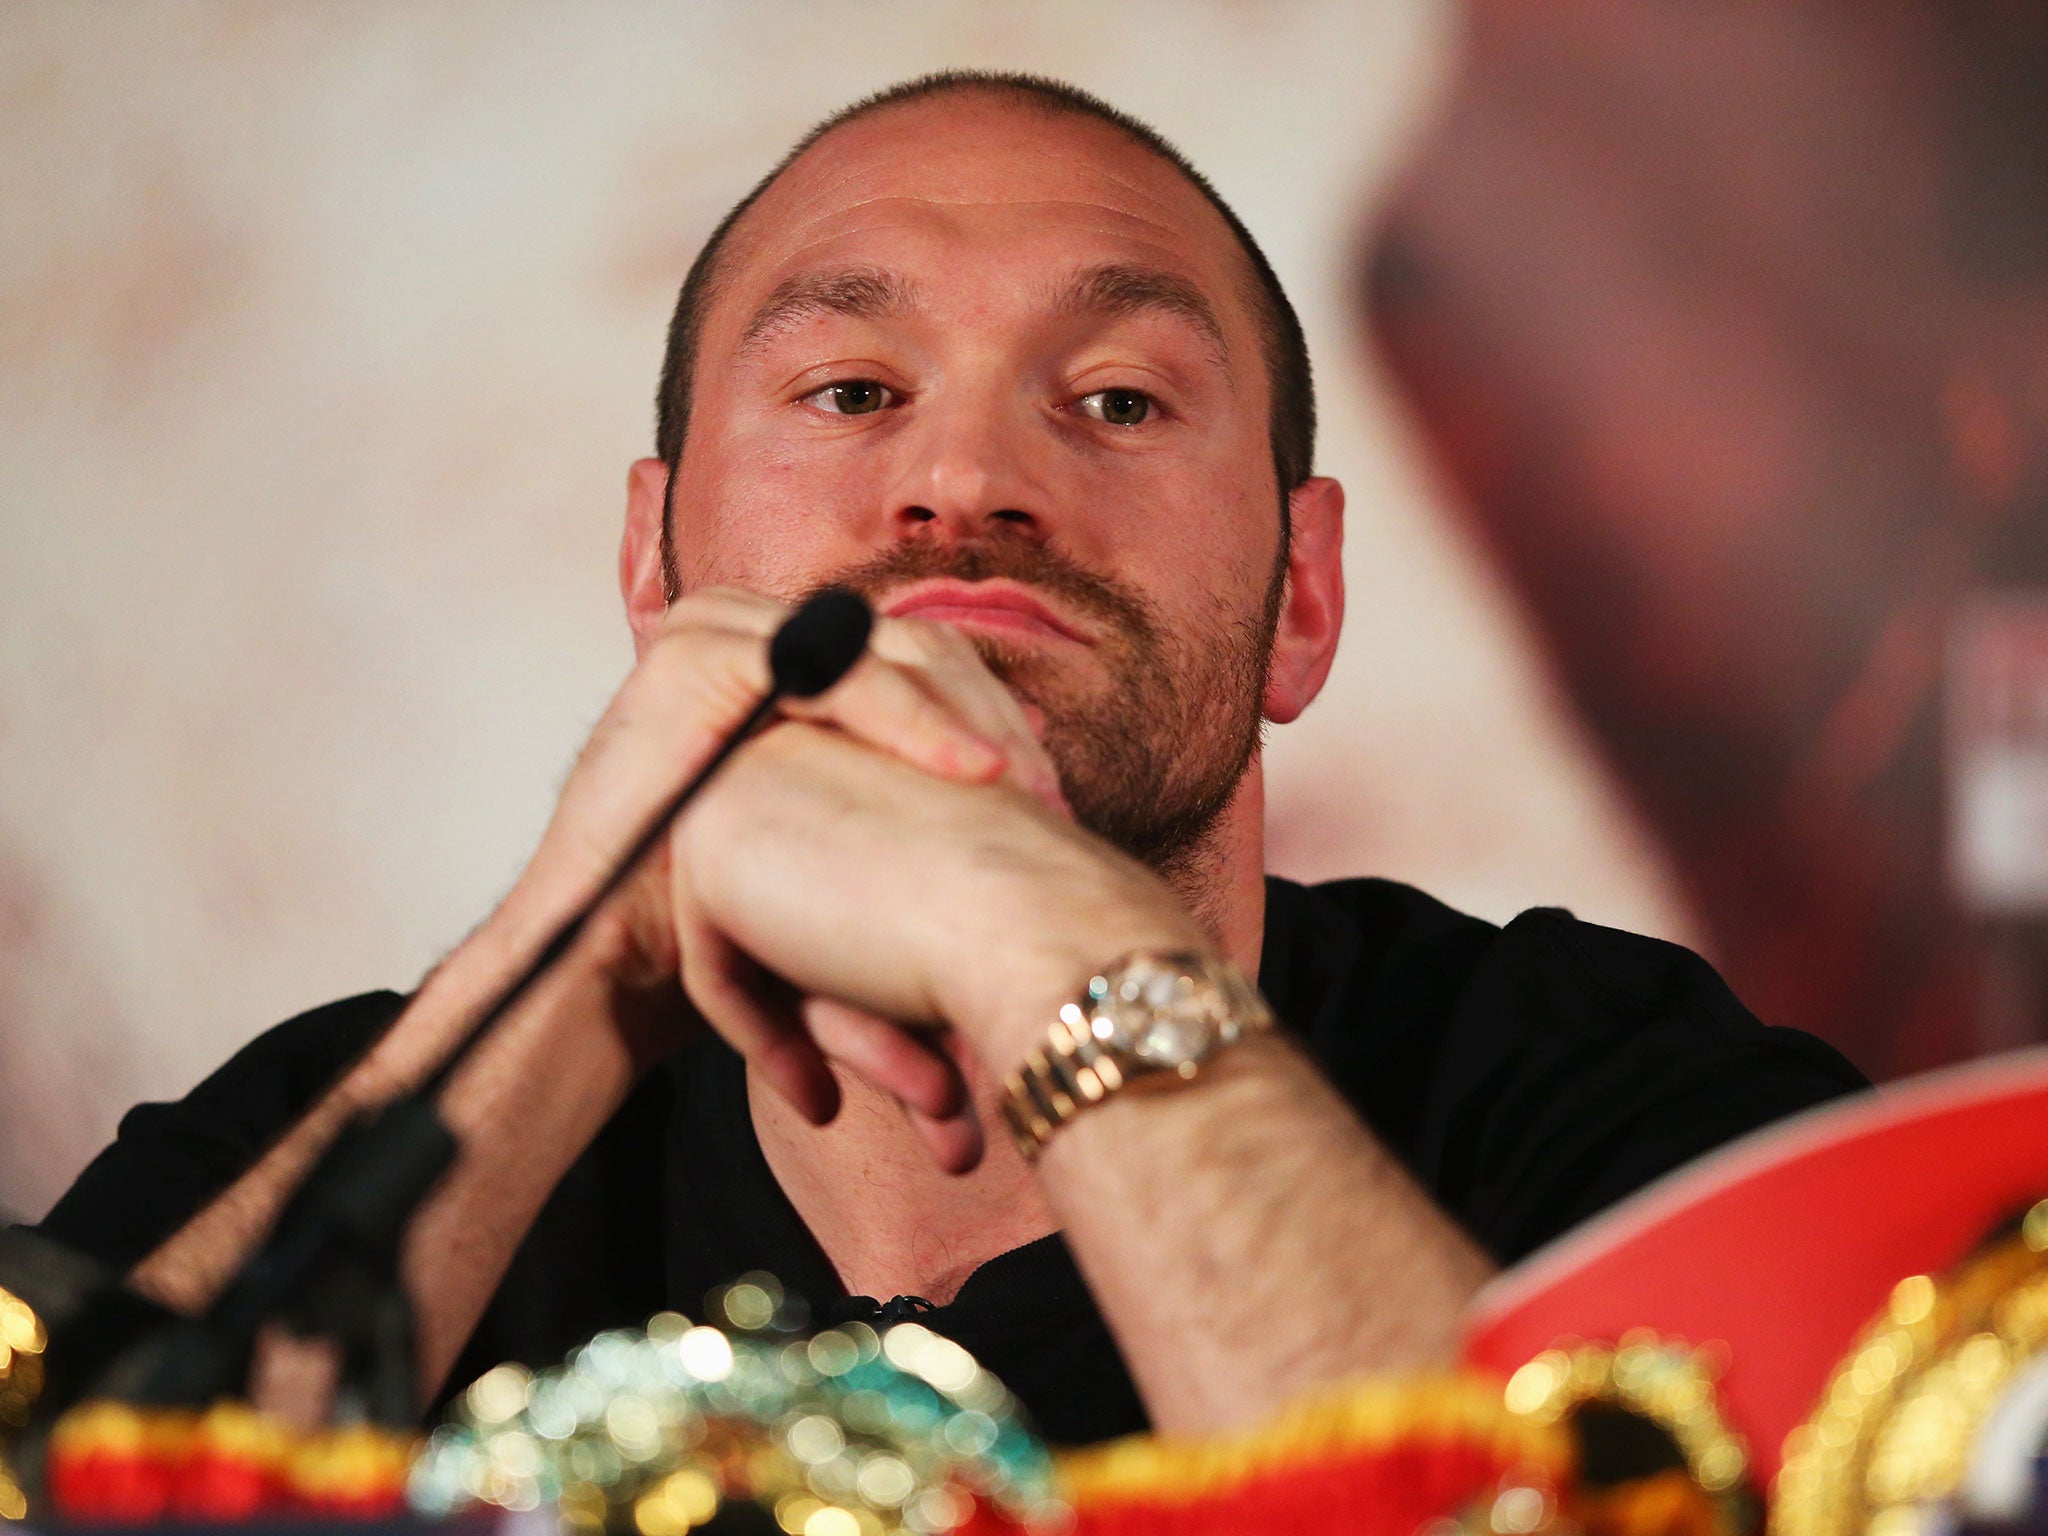 Fury revealed he has been taking cocaine in an interview last month